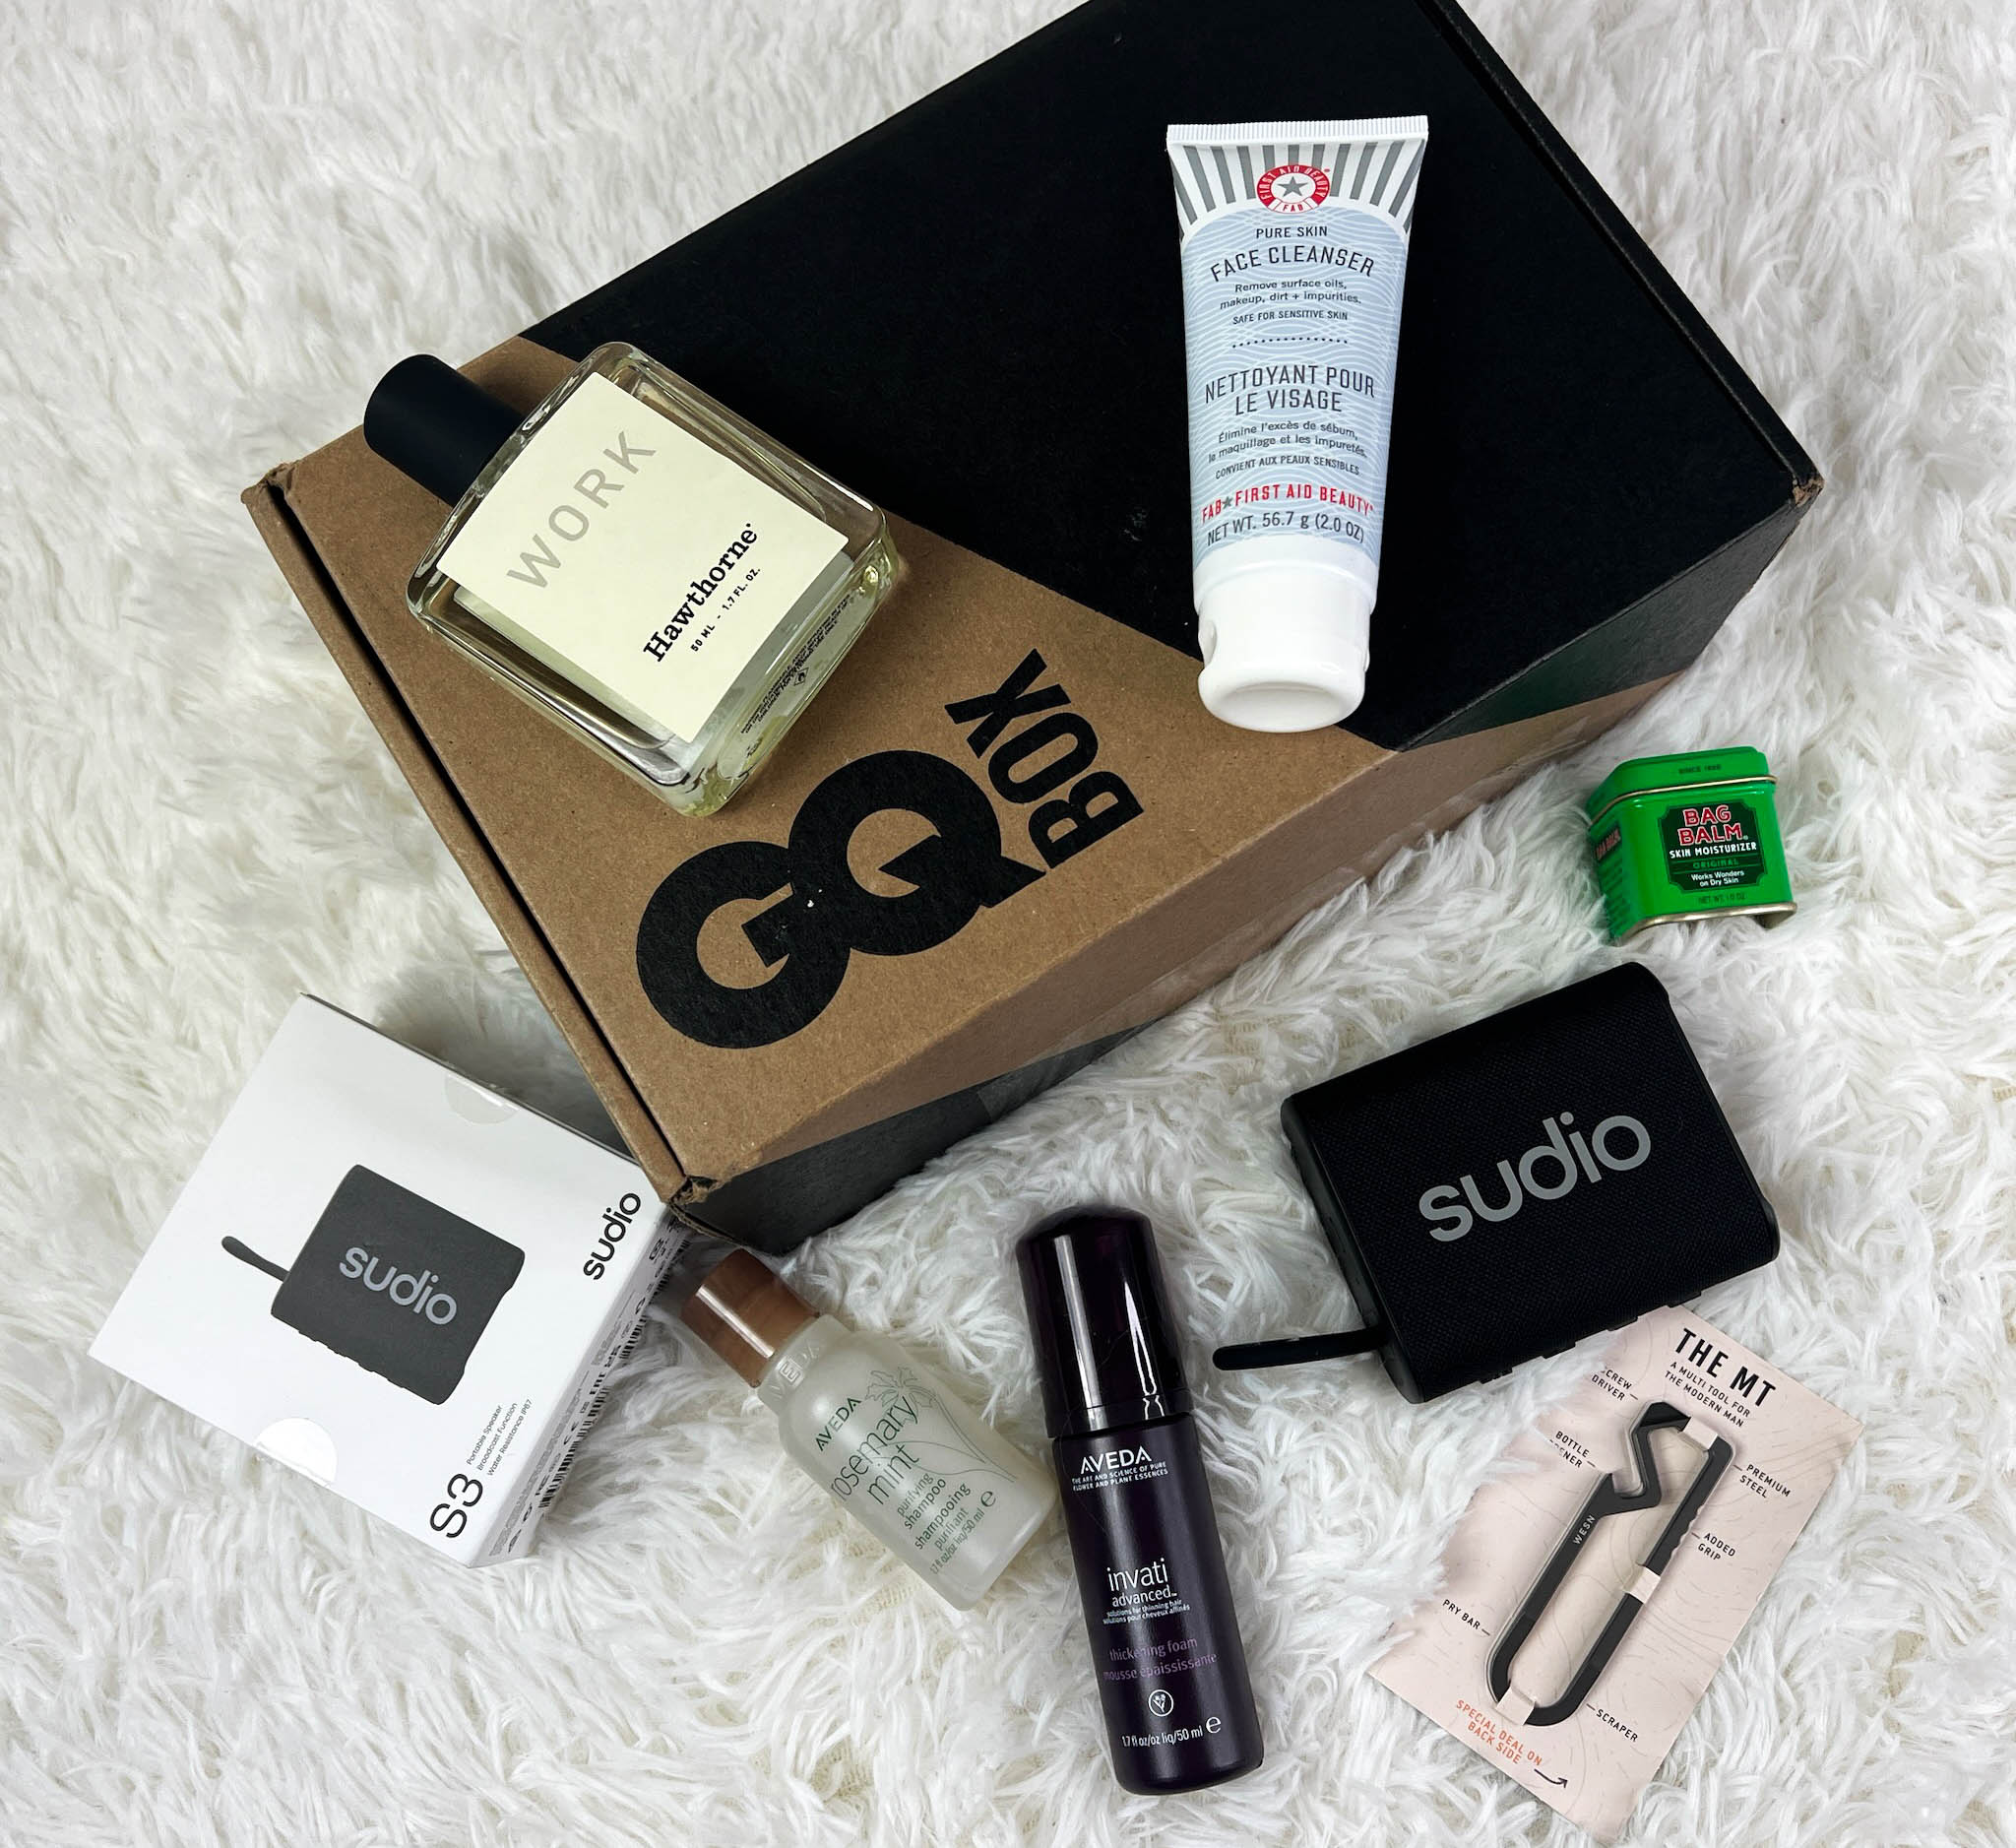 The Latest GQ Box Is Your Fall Starter Pack